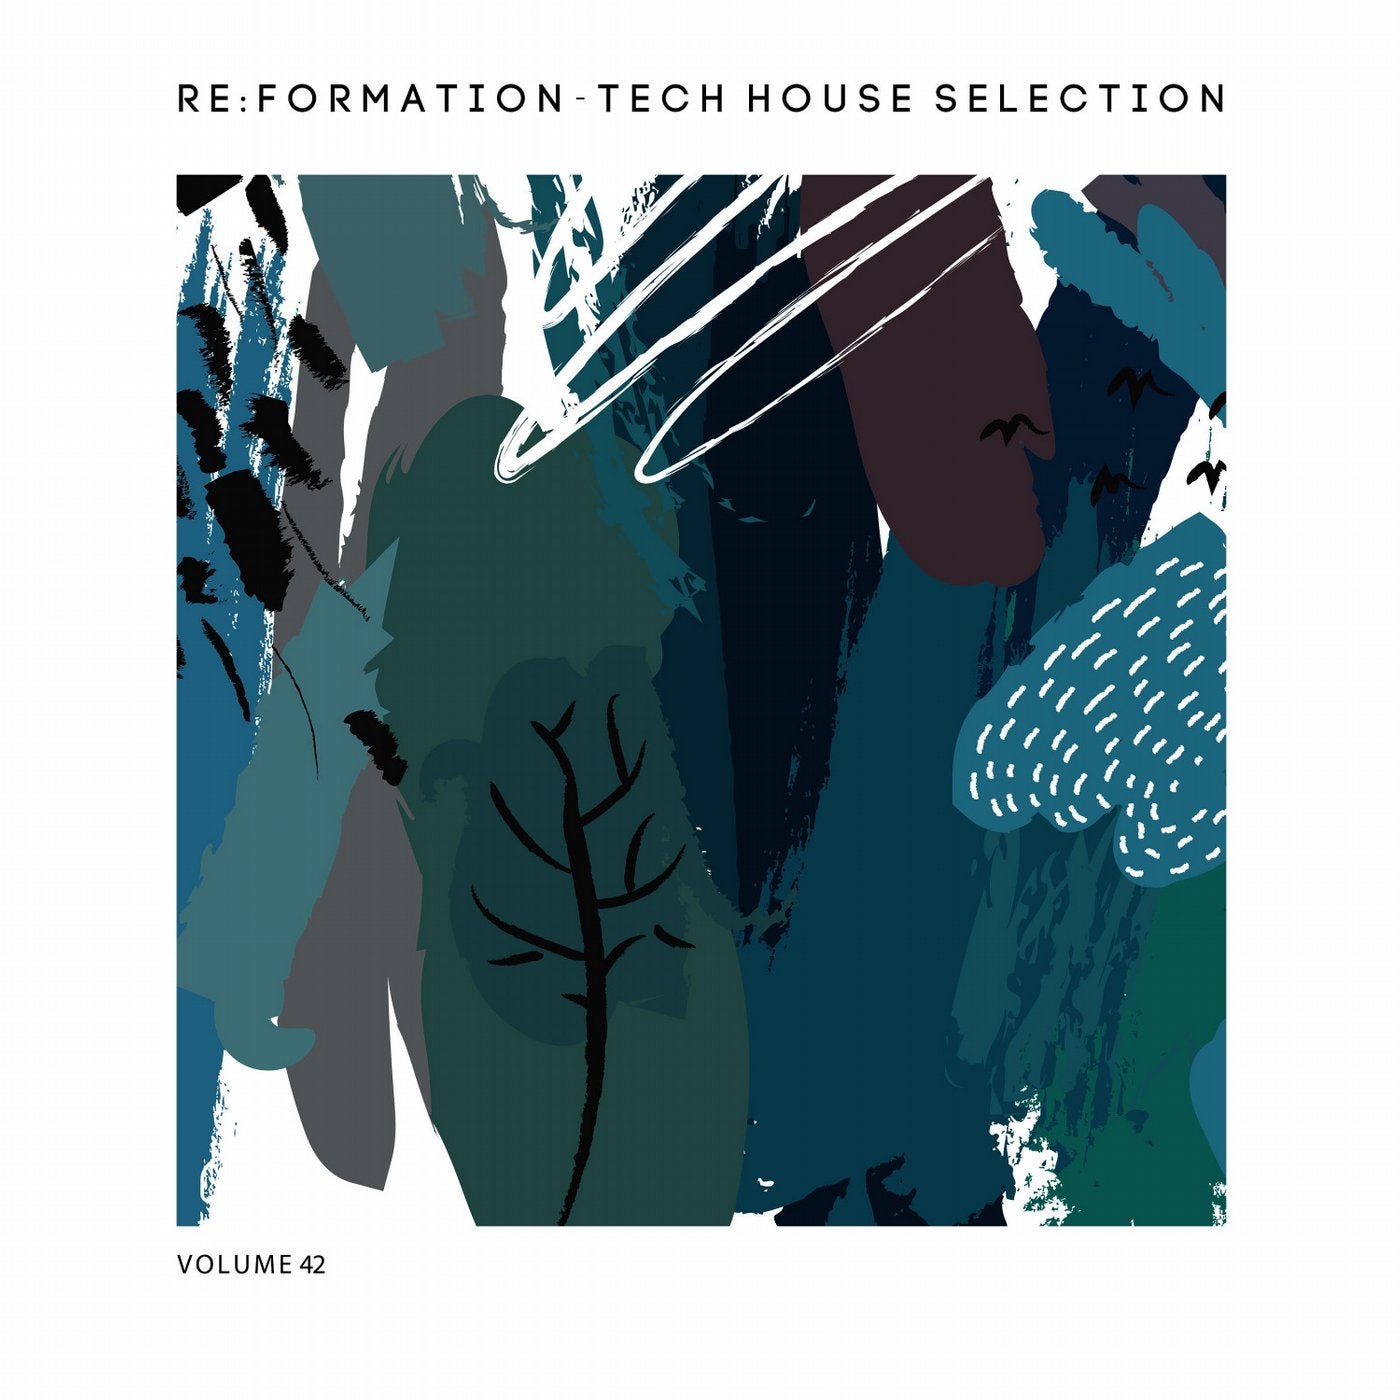 Re:Formation Vol. 42 - Tech House Selection